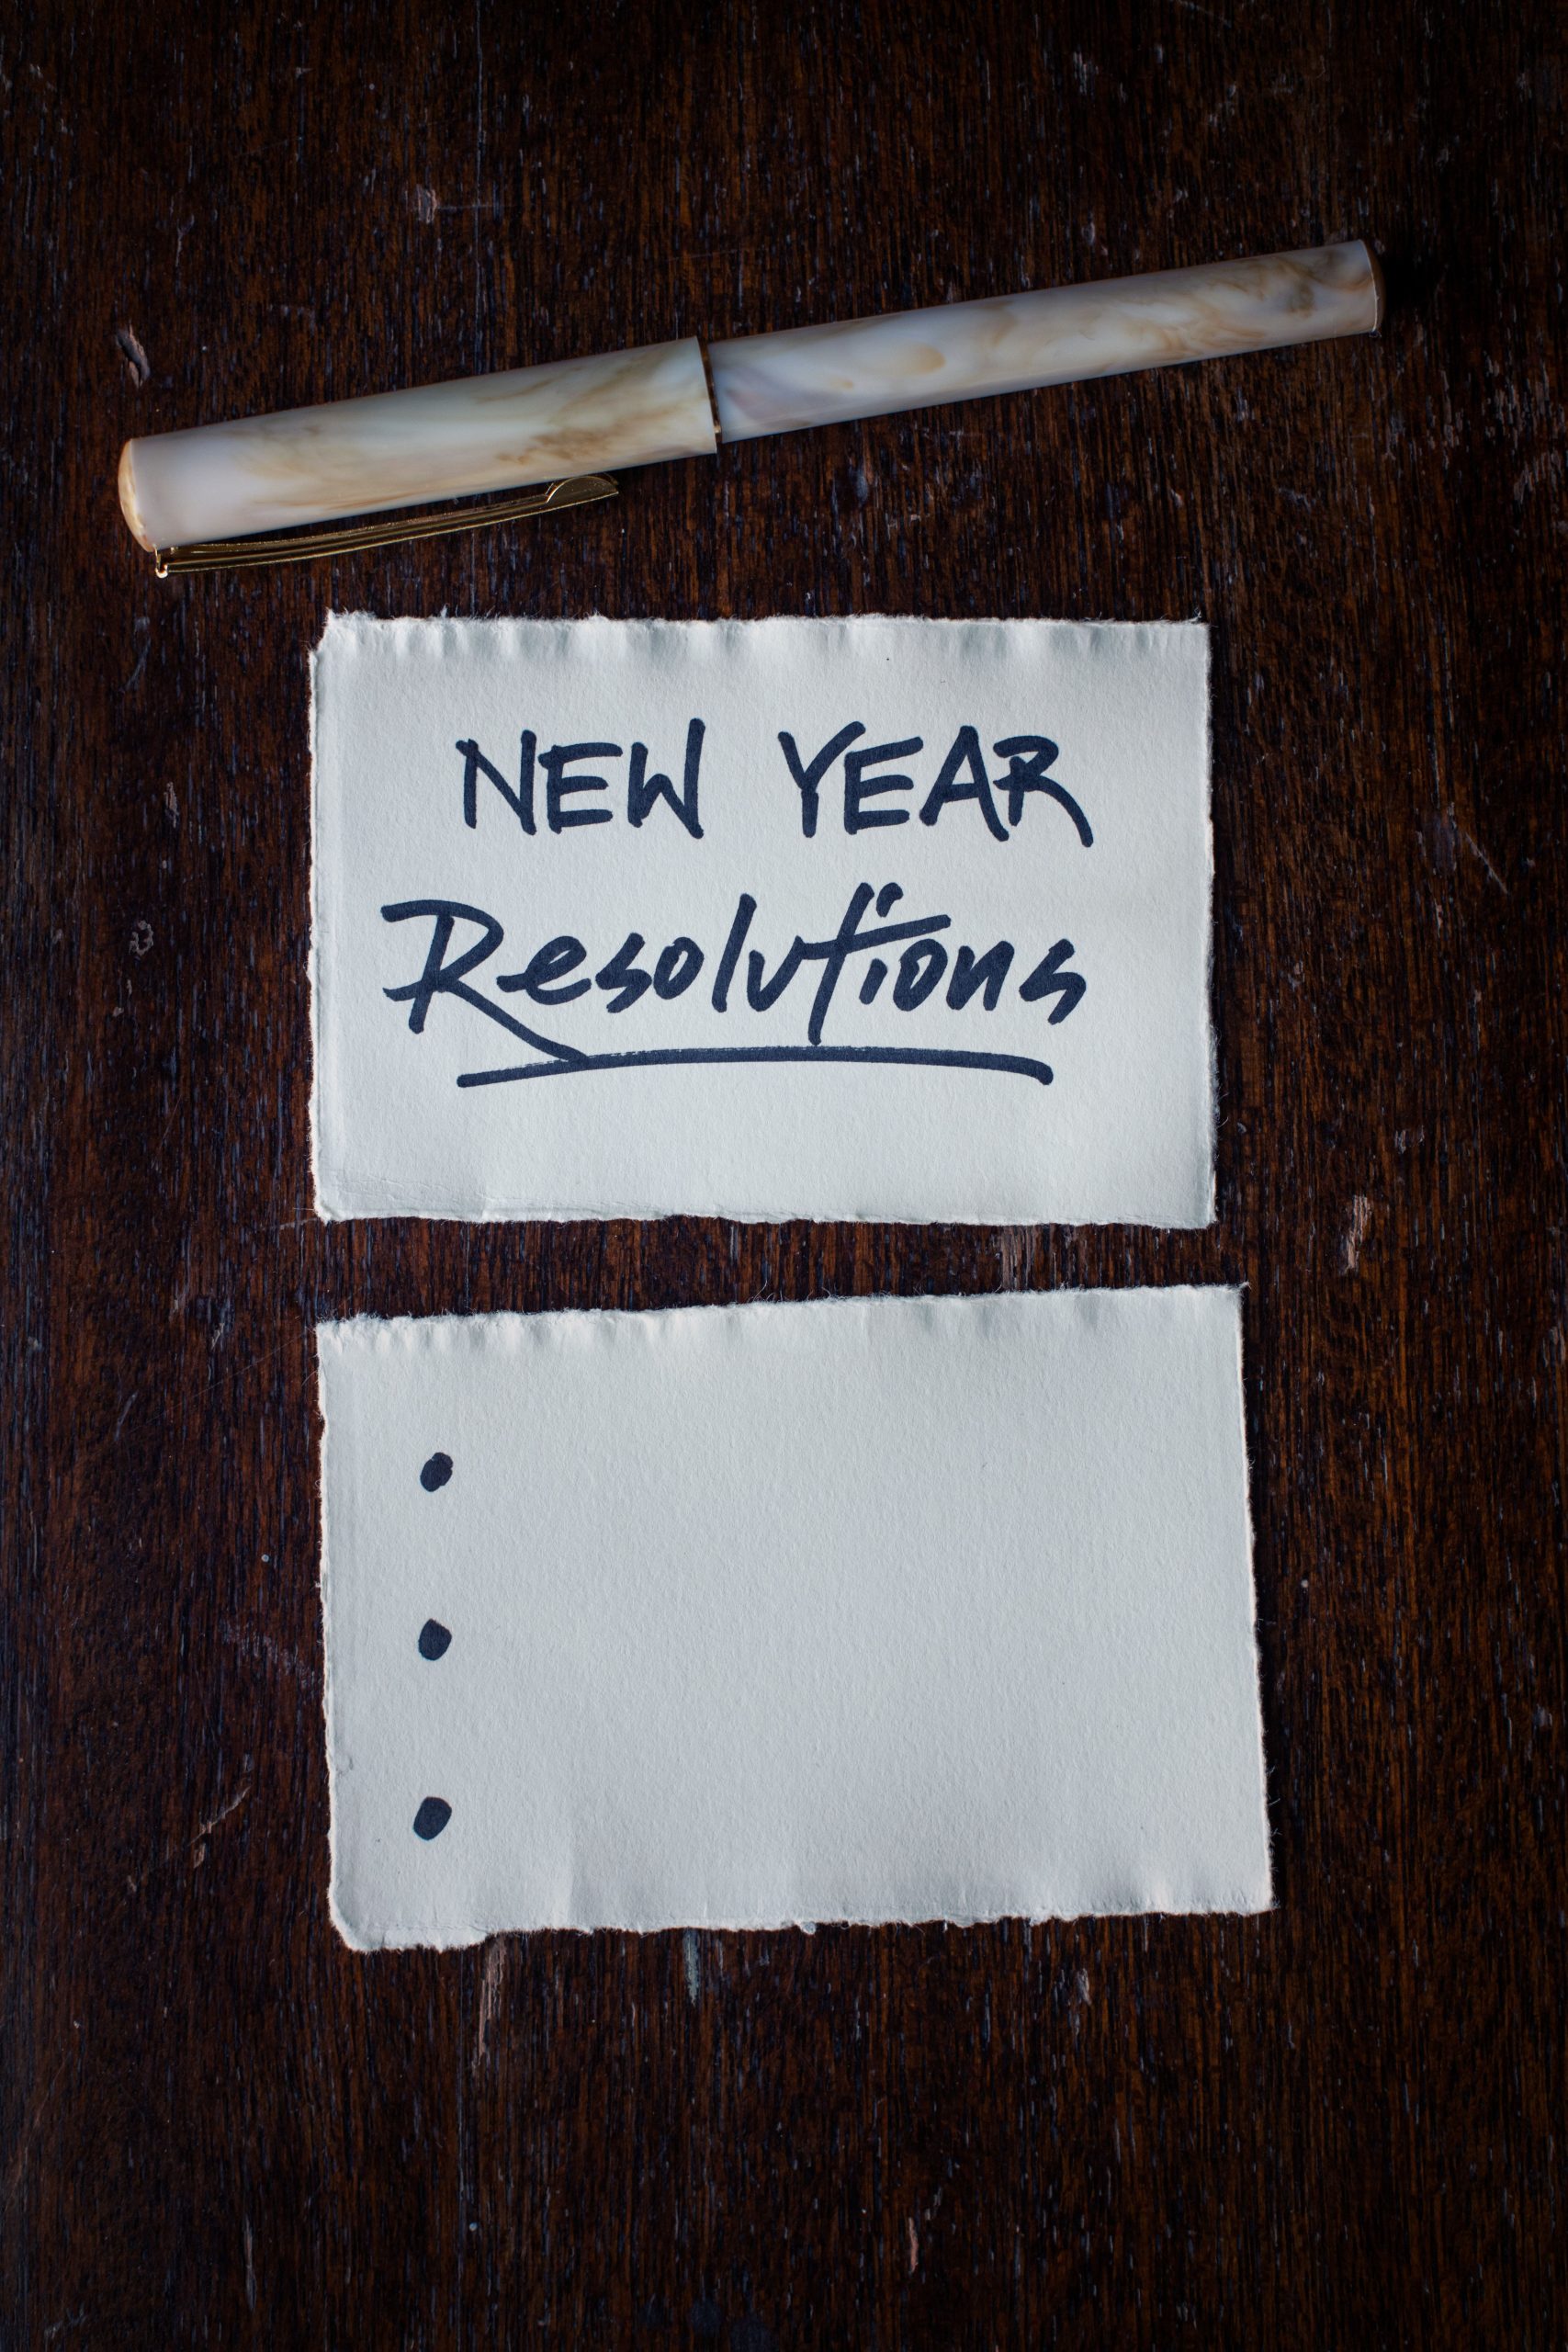 TheBoldAge asks should we be making new year resolutions?